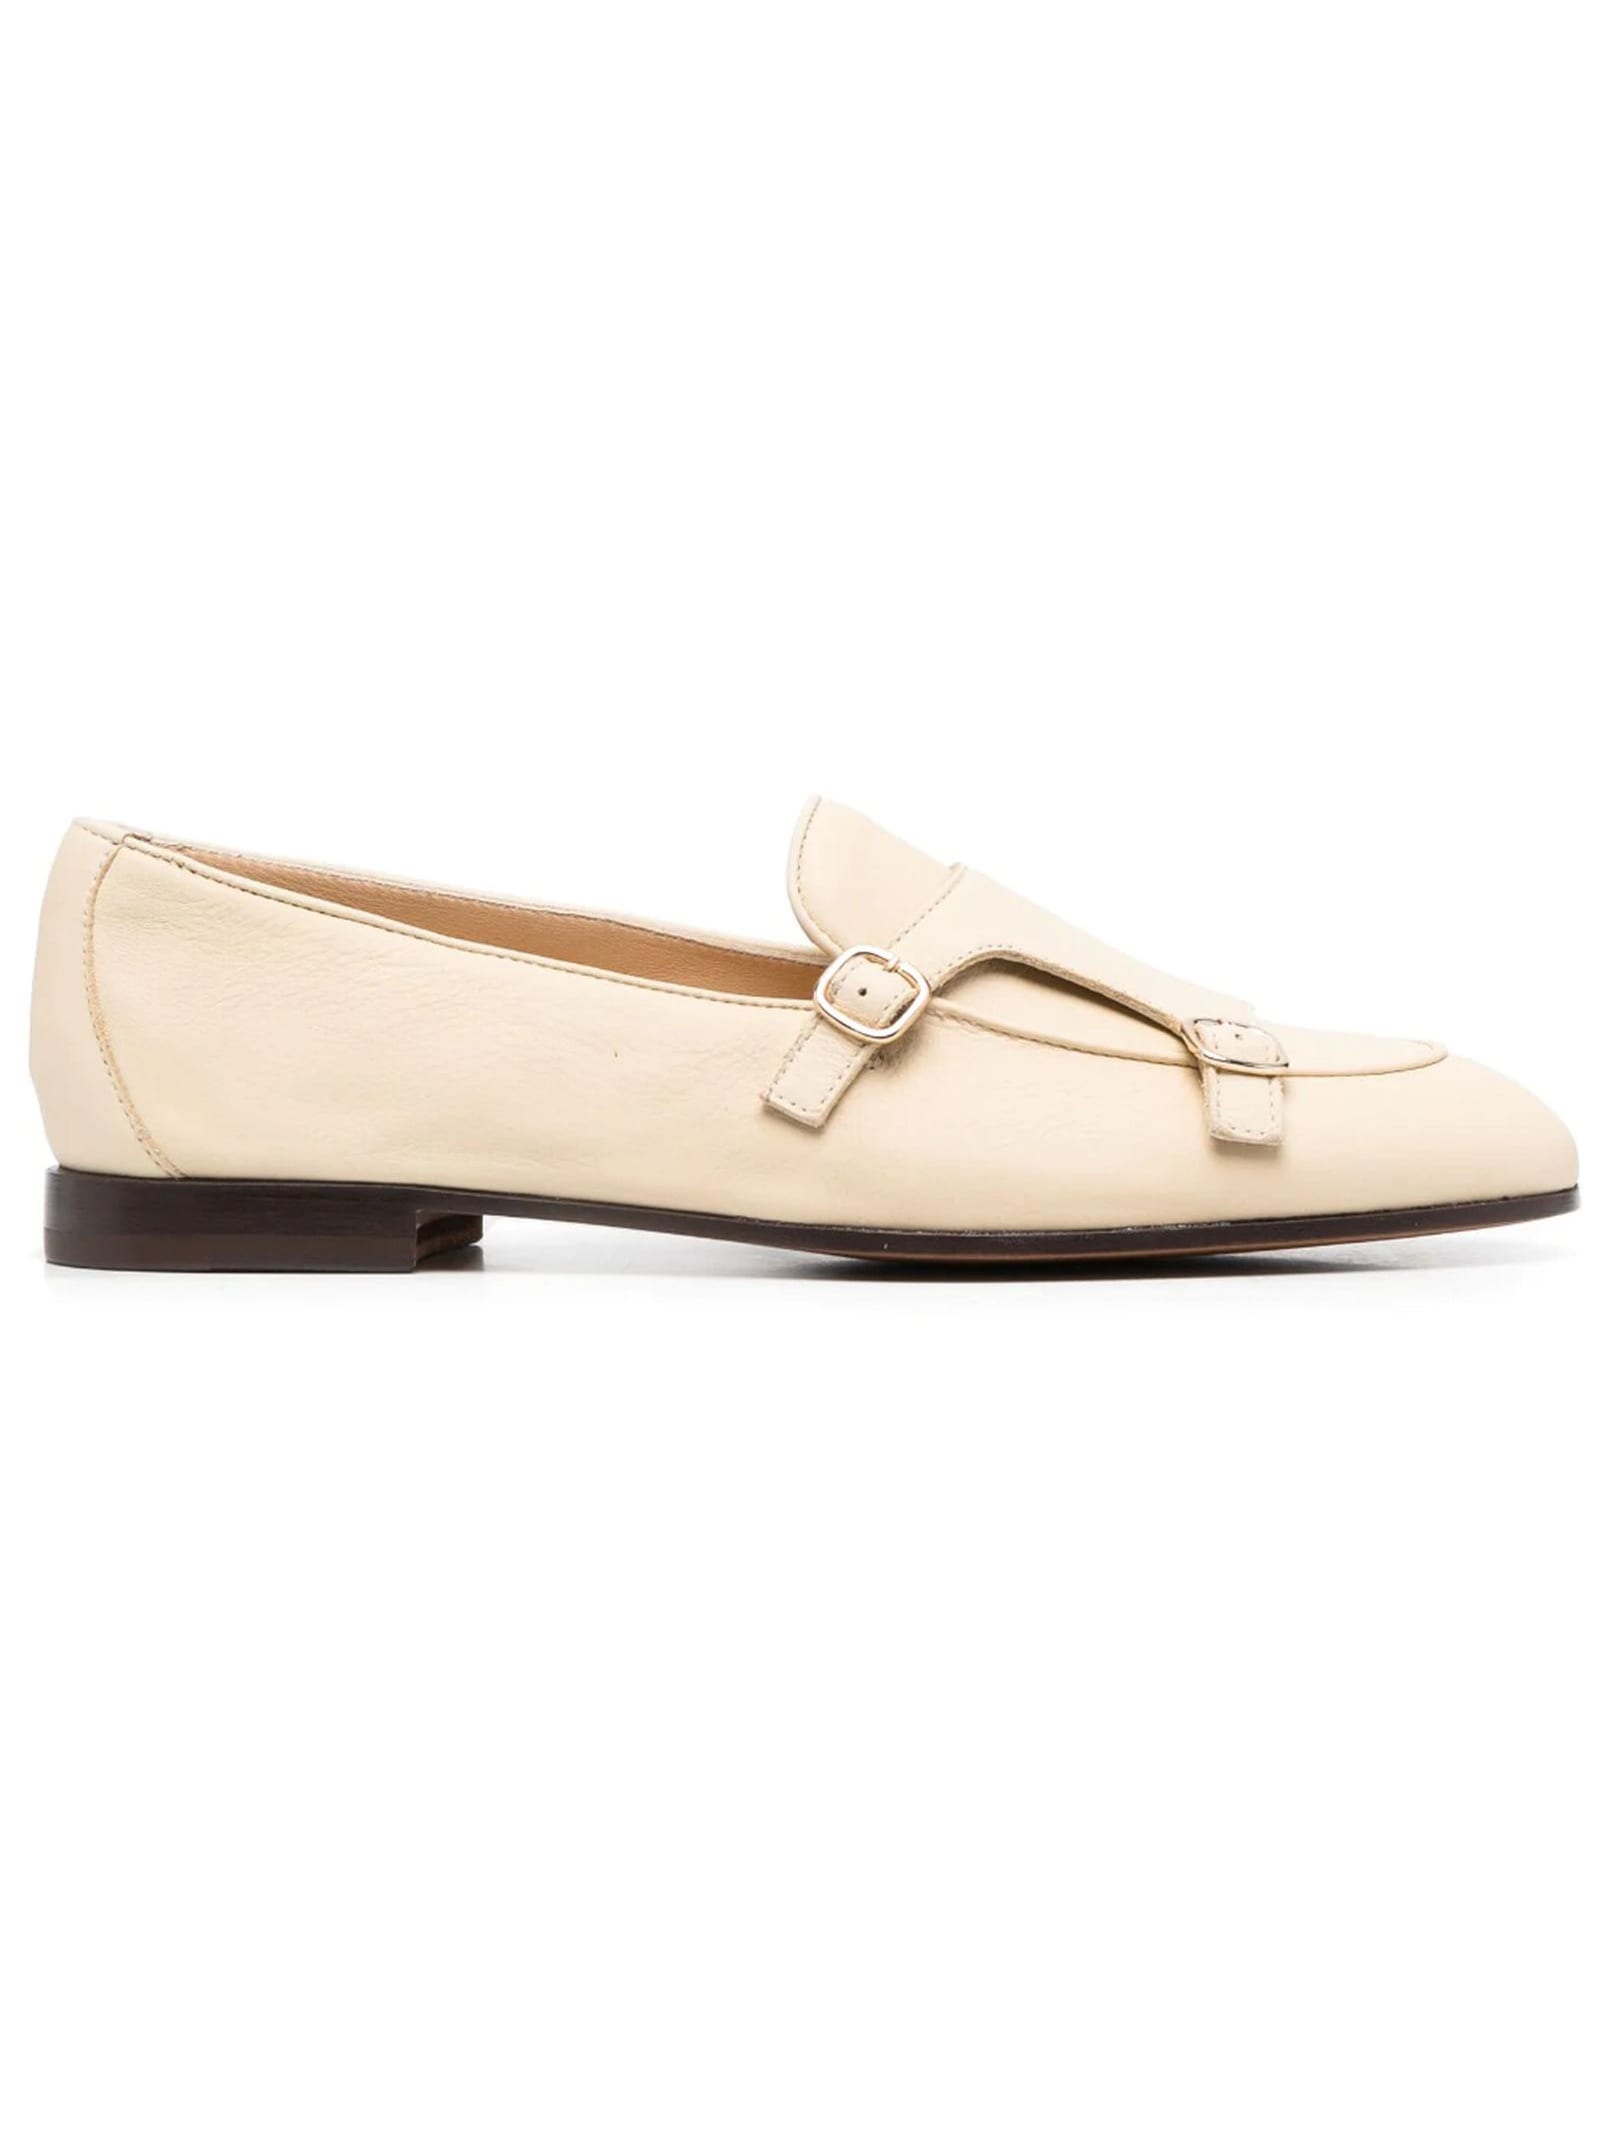 DOUCAL'S VANILLA WHITE CALF LEATHER LOAFERS